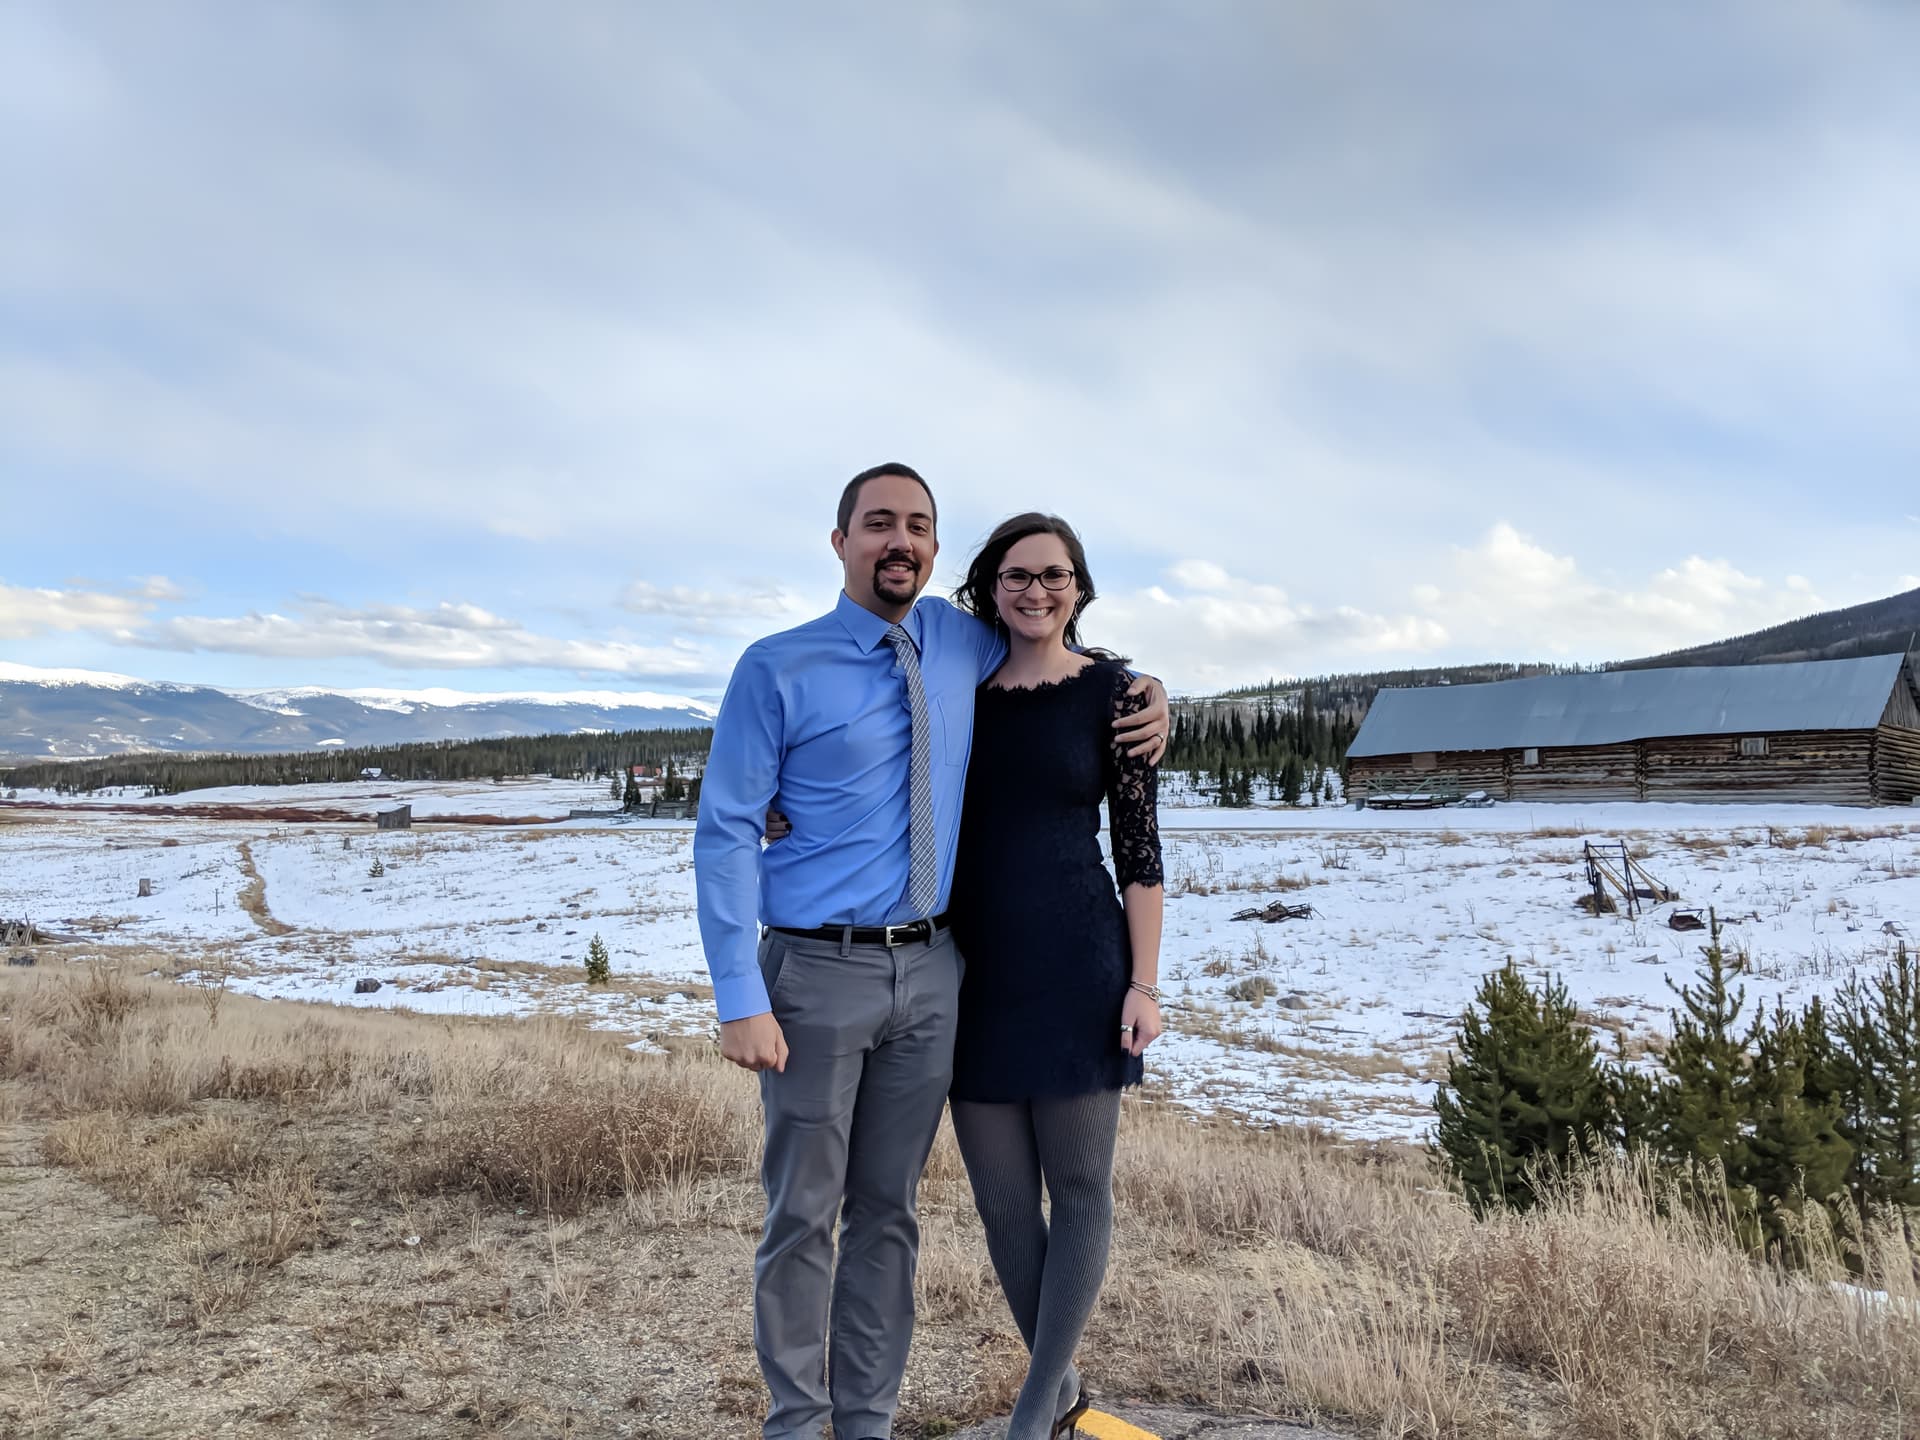 A man and woman pose outside together. Behind them is a snowy high country ranch, and in the distance the Rocky Mountains.